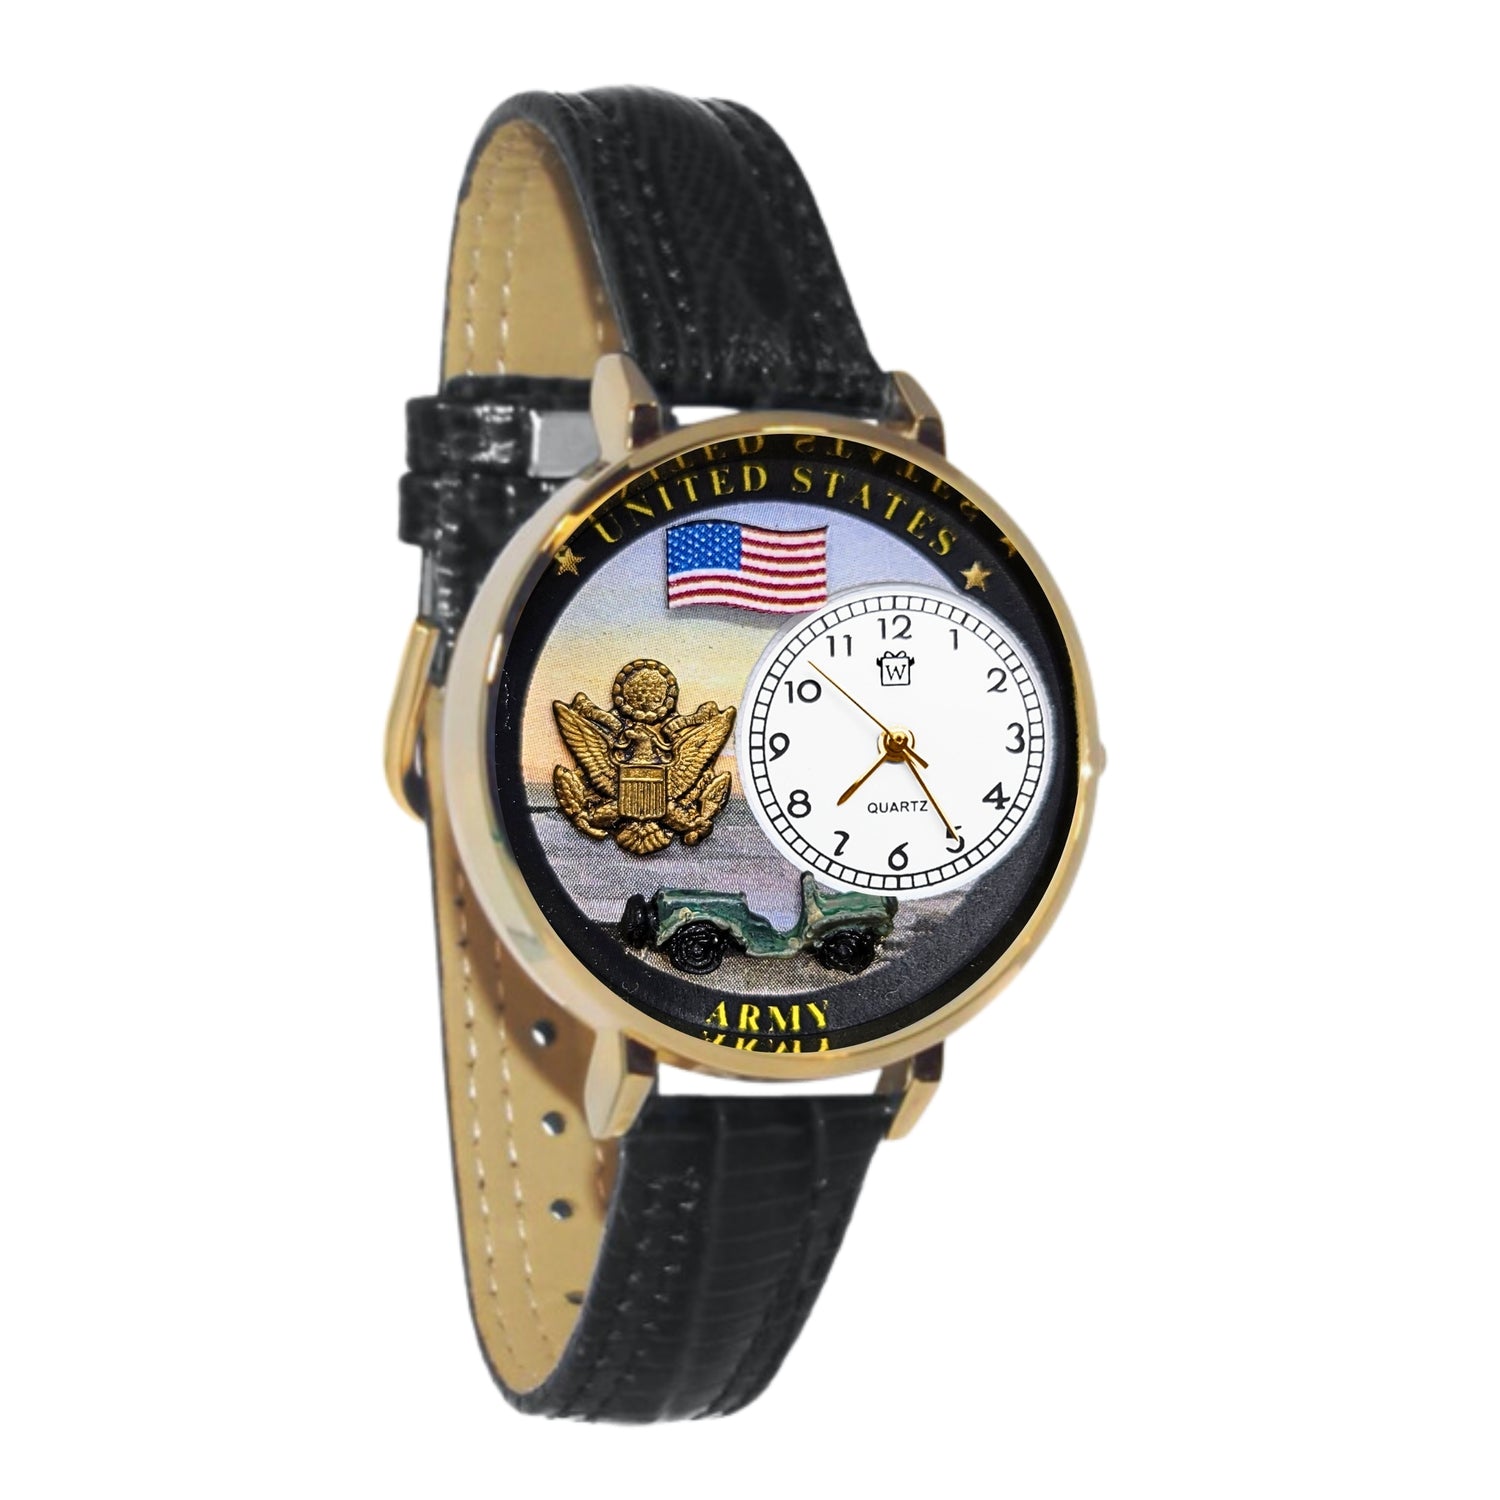 Whimsical Gifts | United States Army 3D Watch Large Style | Handmade in USA | Patriotic |  | Novelty Unique Fun Miniatures Gift | Gold Finish Black Leather Watch Band